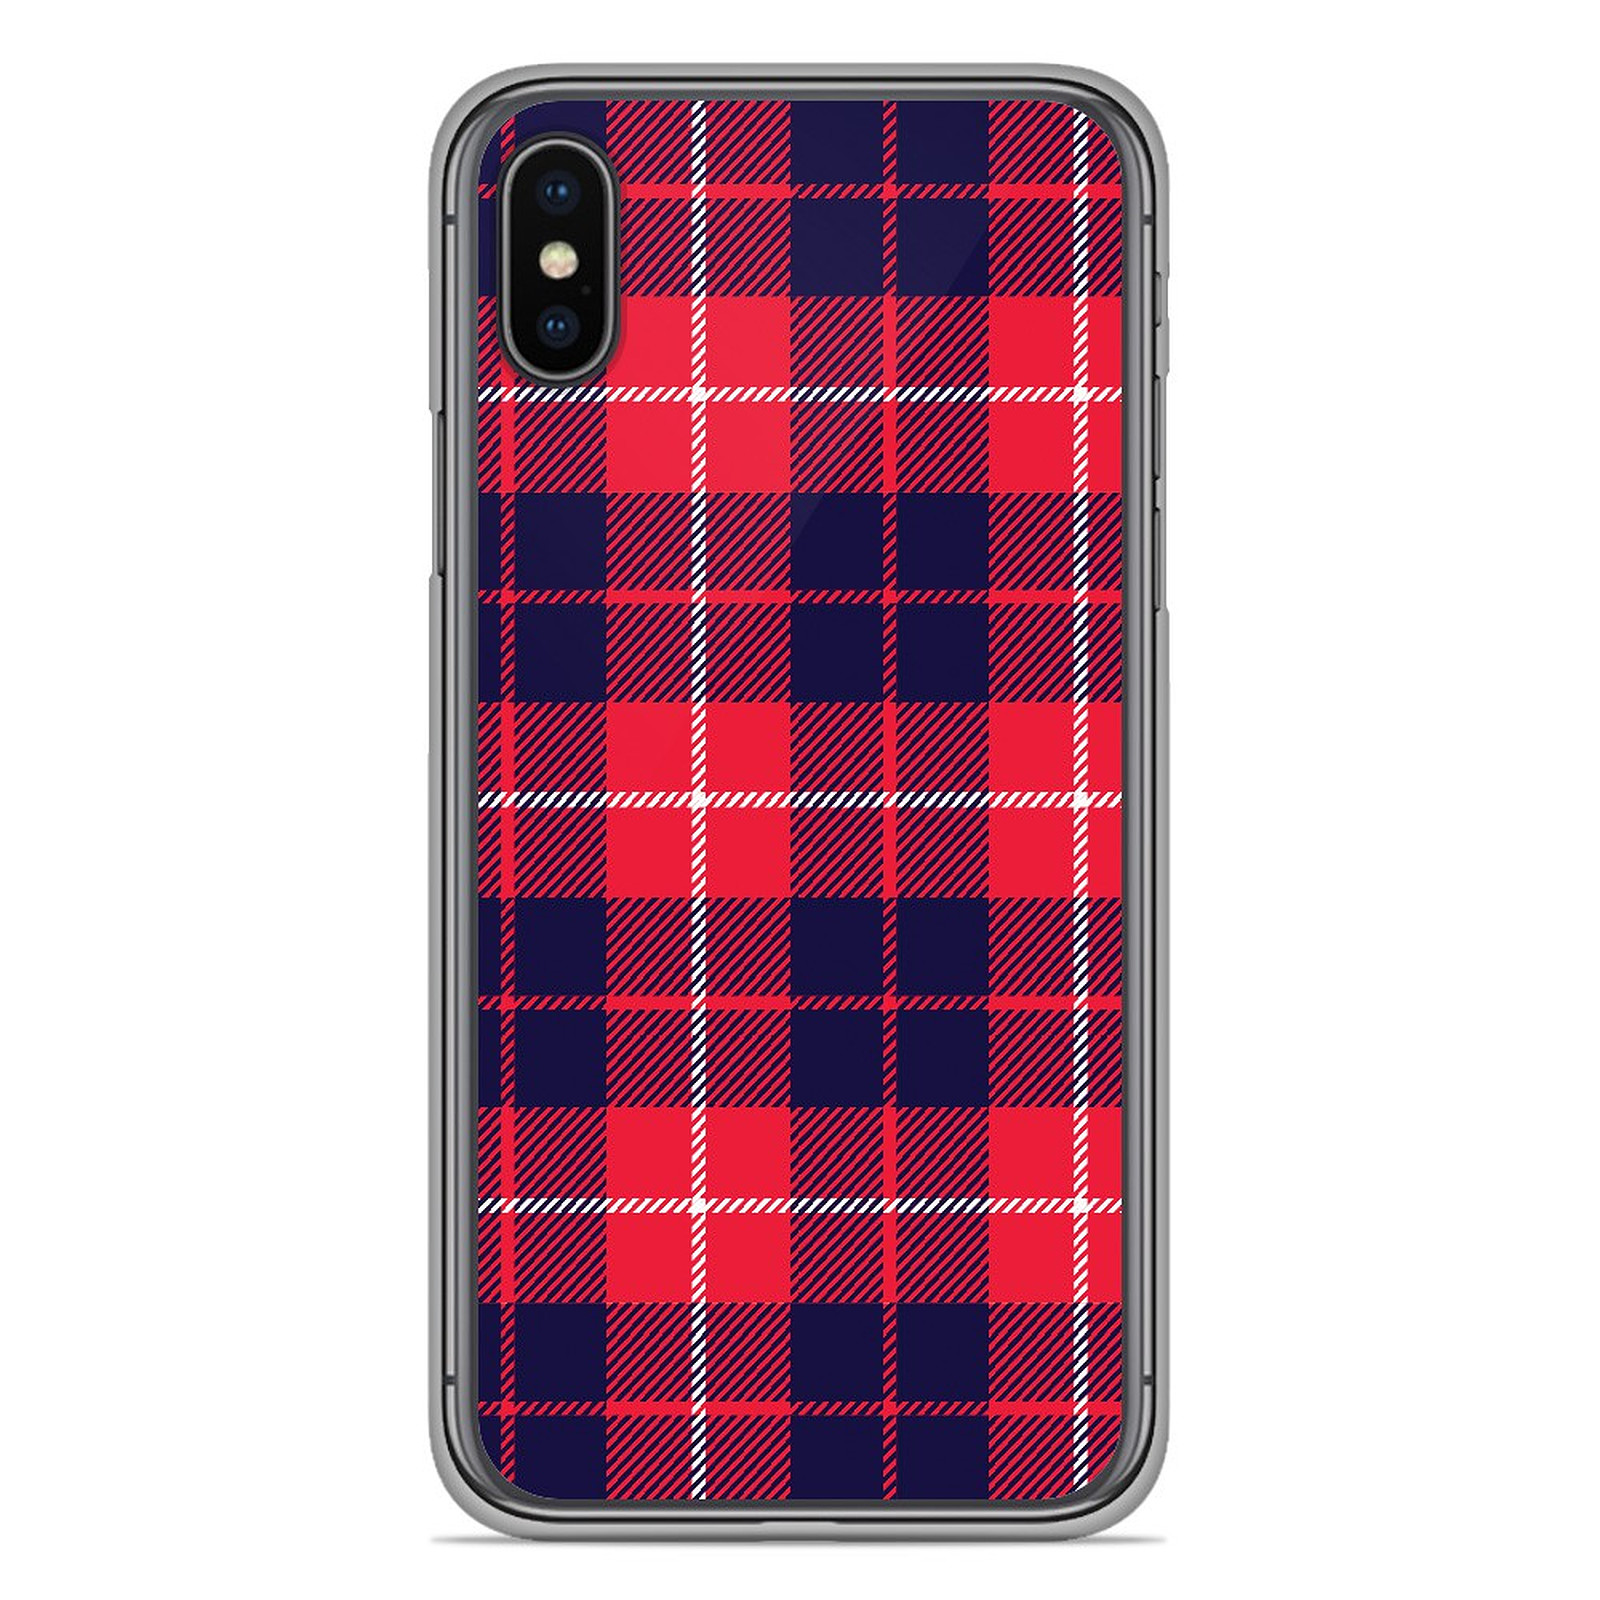 1001 Coques Coque silicone gel Apple iPhone XS Max motif Tartan Rouge 2 - Coque telephone 1001Coques